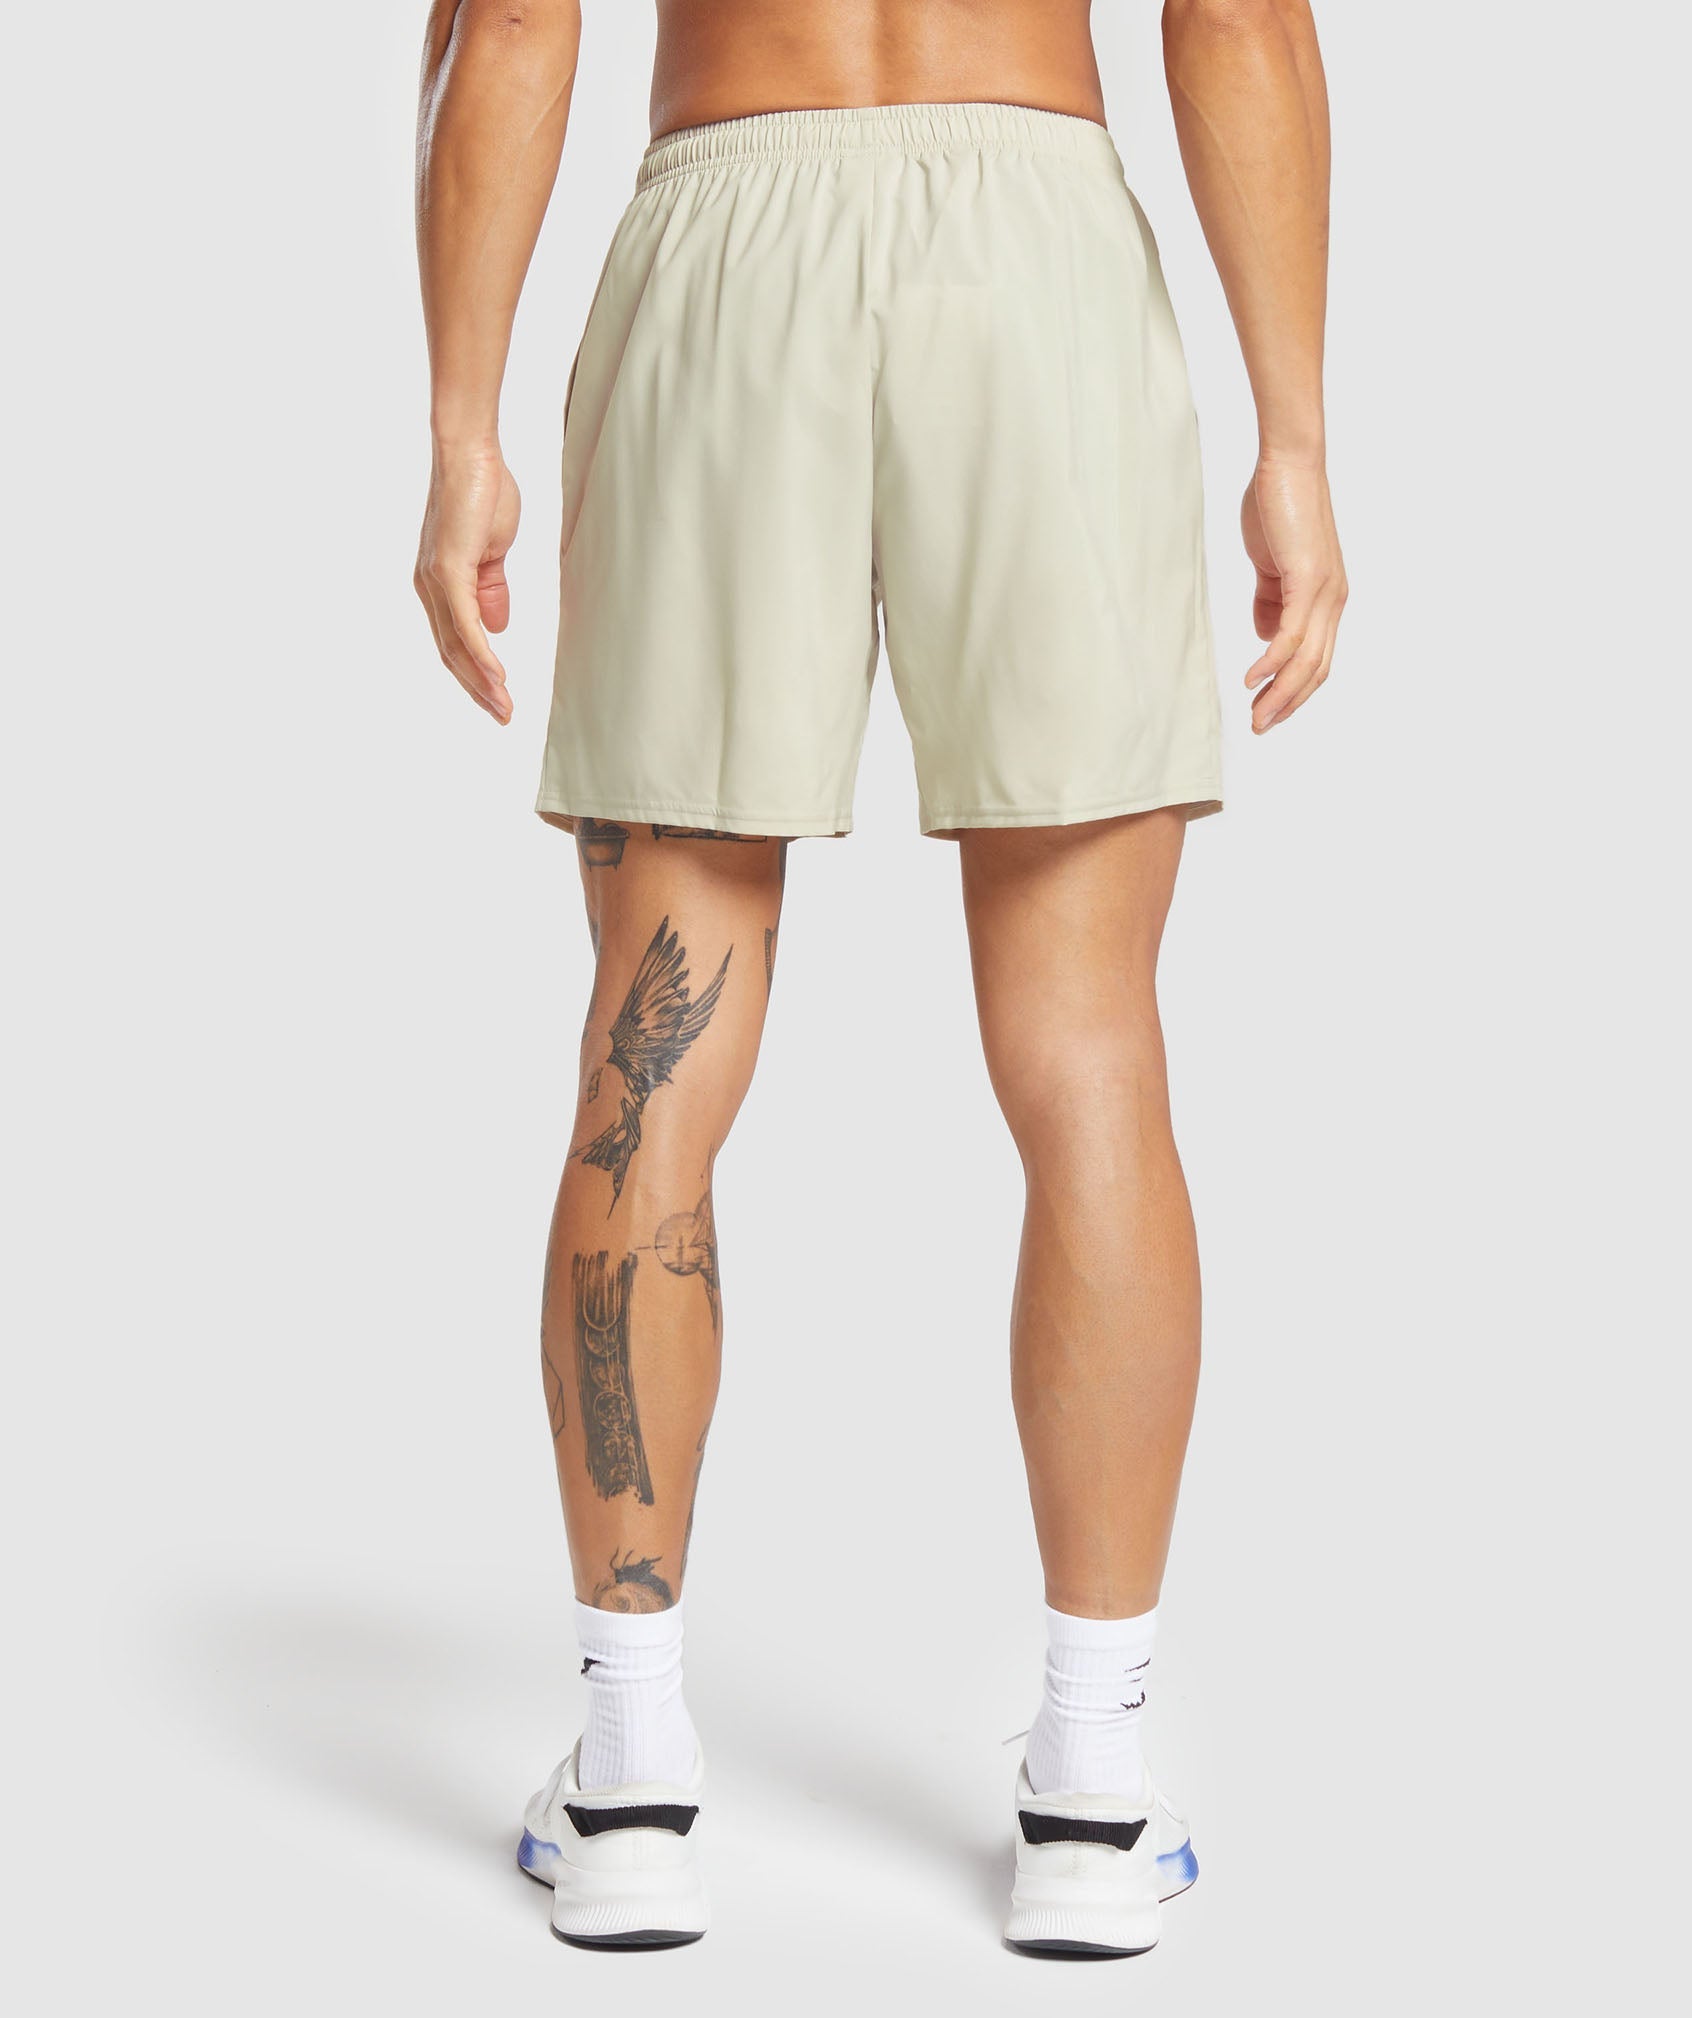 Hybrid Wellness 7" Shorts in Pebble Grey - view 2